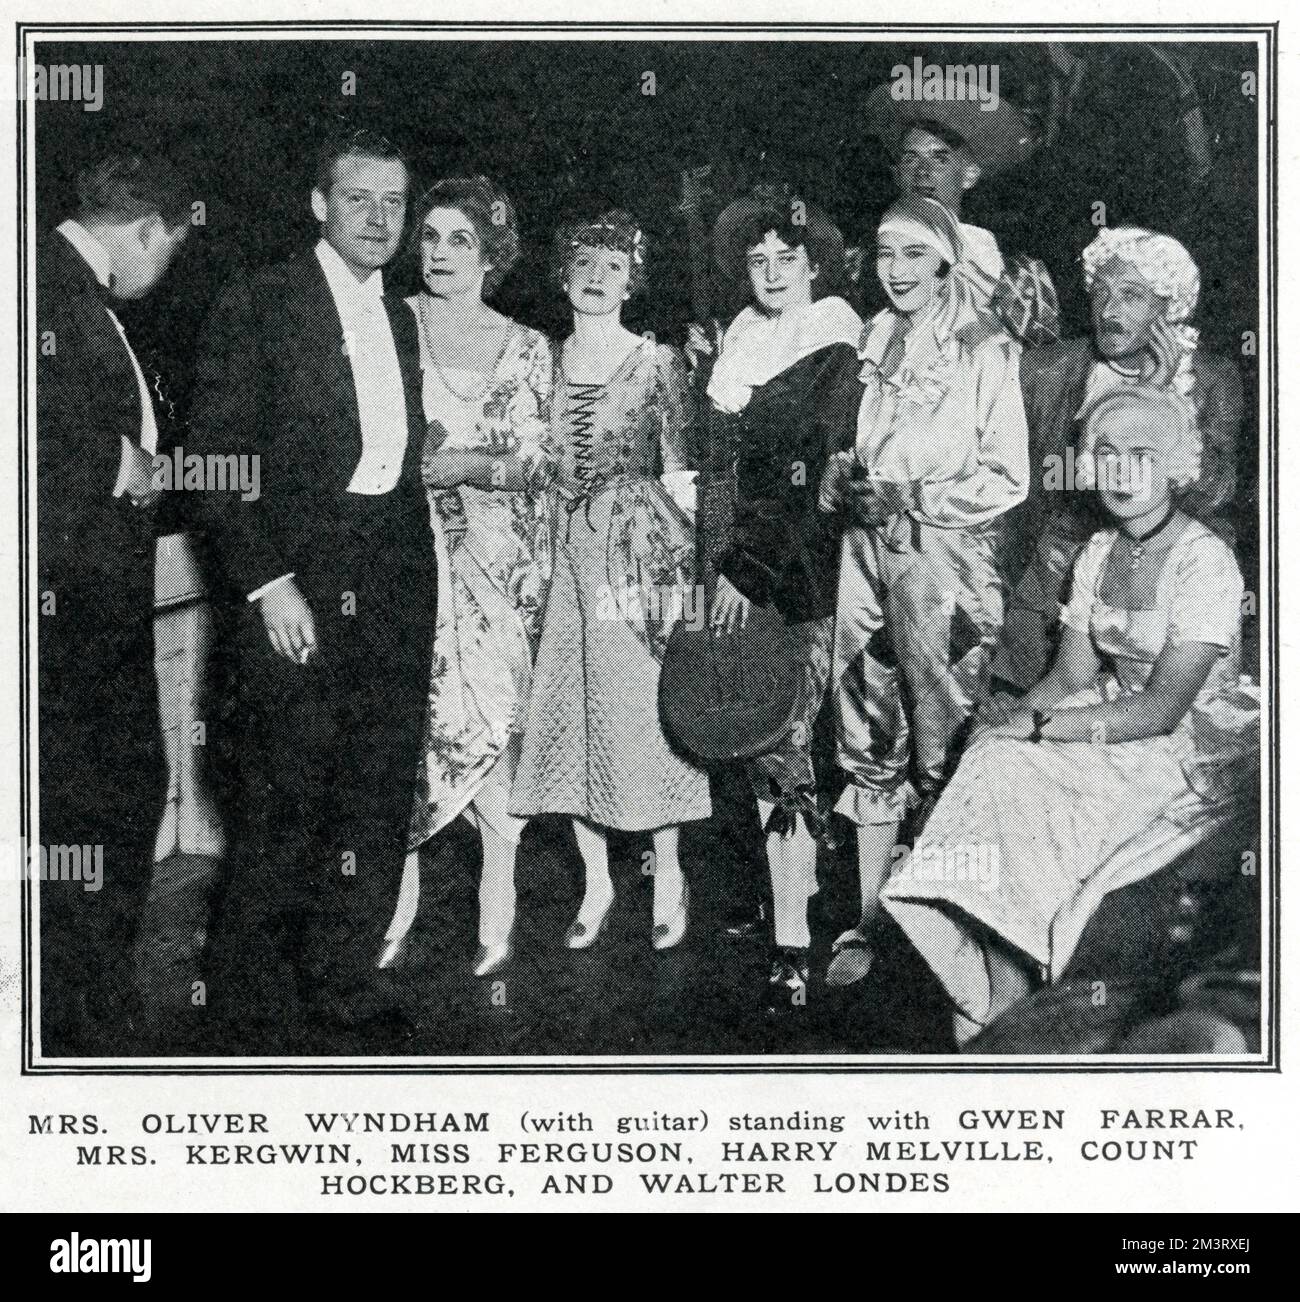 Mrs Oliver Wyndham (with guitar) standing with Gwen Farrar, Mrs Kergwin, Miss Ferguson, Harry Melville, Count Hockberg, and Walter Londes at a party in London aboard the &quot;Friendship&quot;, called by The Tatler a 'Bright Young Party avec dance'.     Date: 1929 Stock Photo